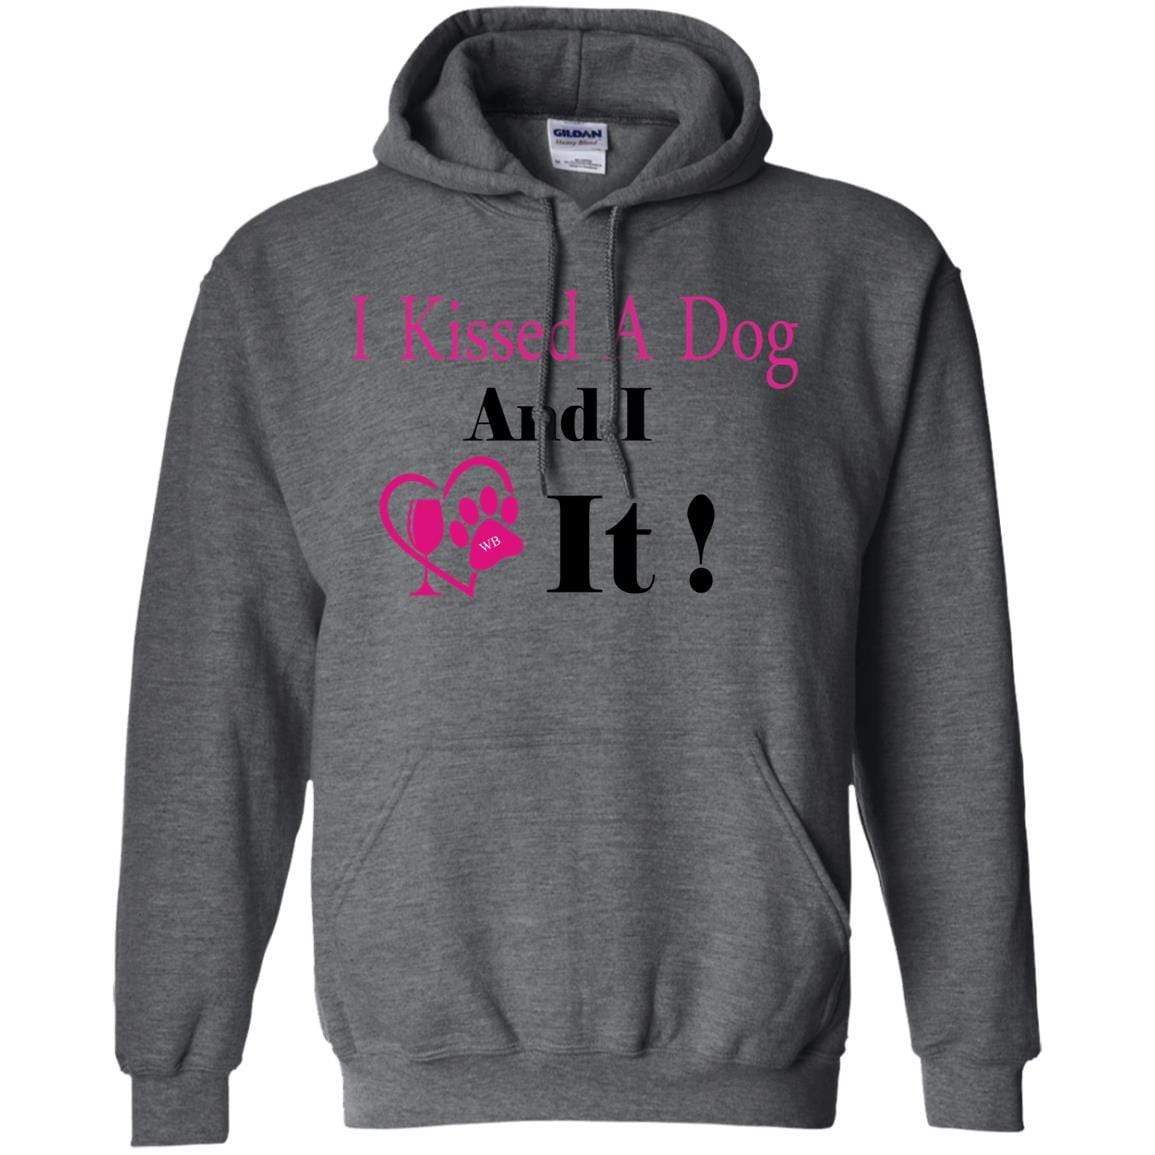 Sweatshirts Dark Heather / S WineyBitches.co "I Kissed A Dog And I Loved It:"  Pullover Unisex Hoodie 8 oz. WineyBitchesCo